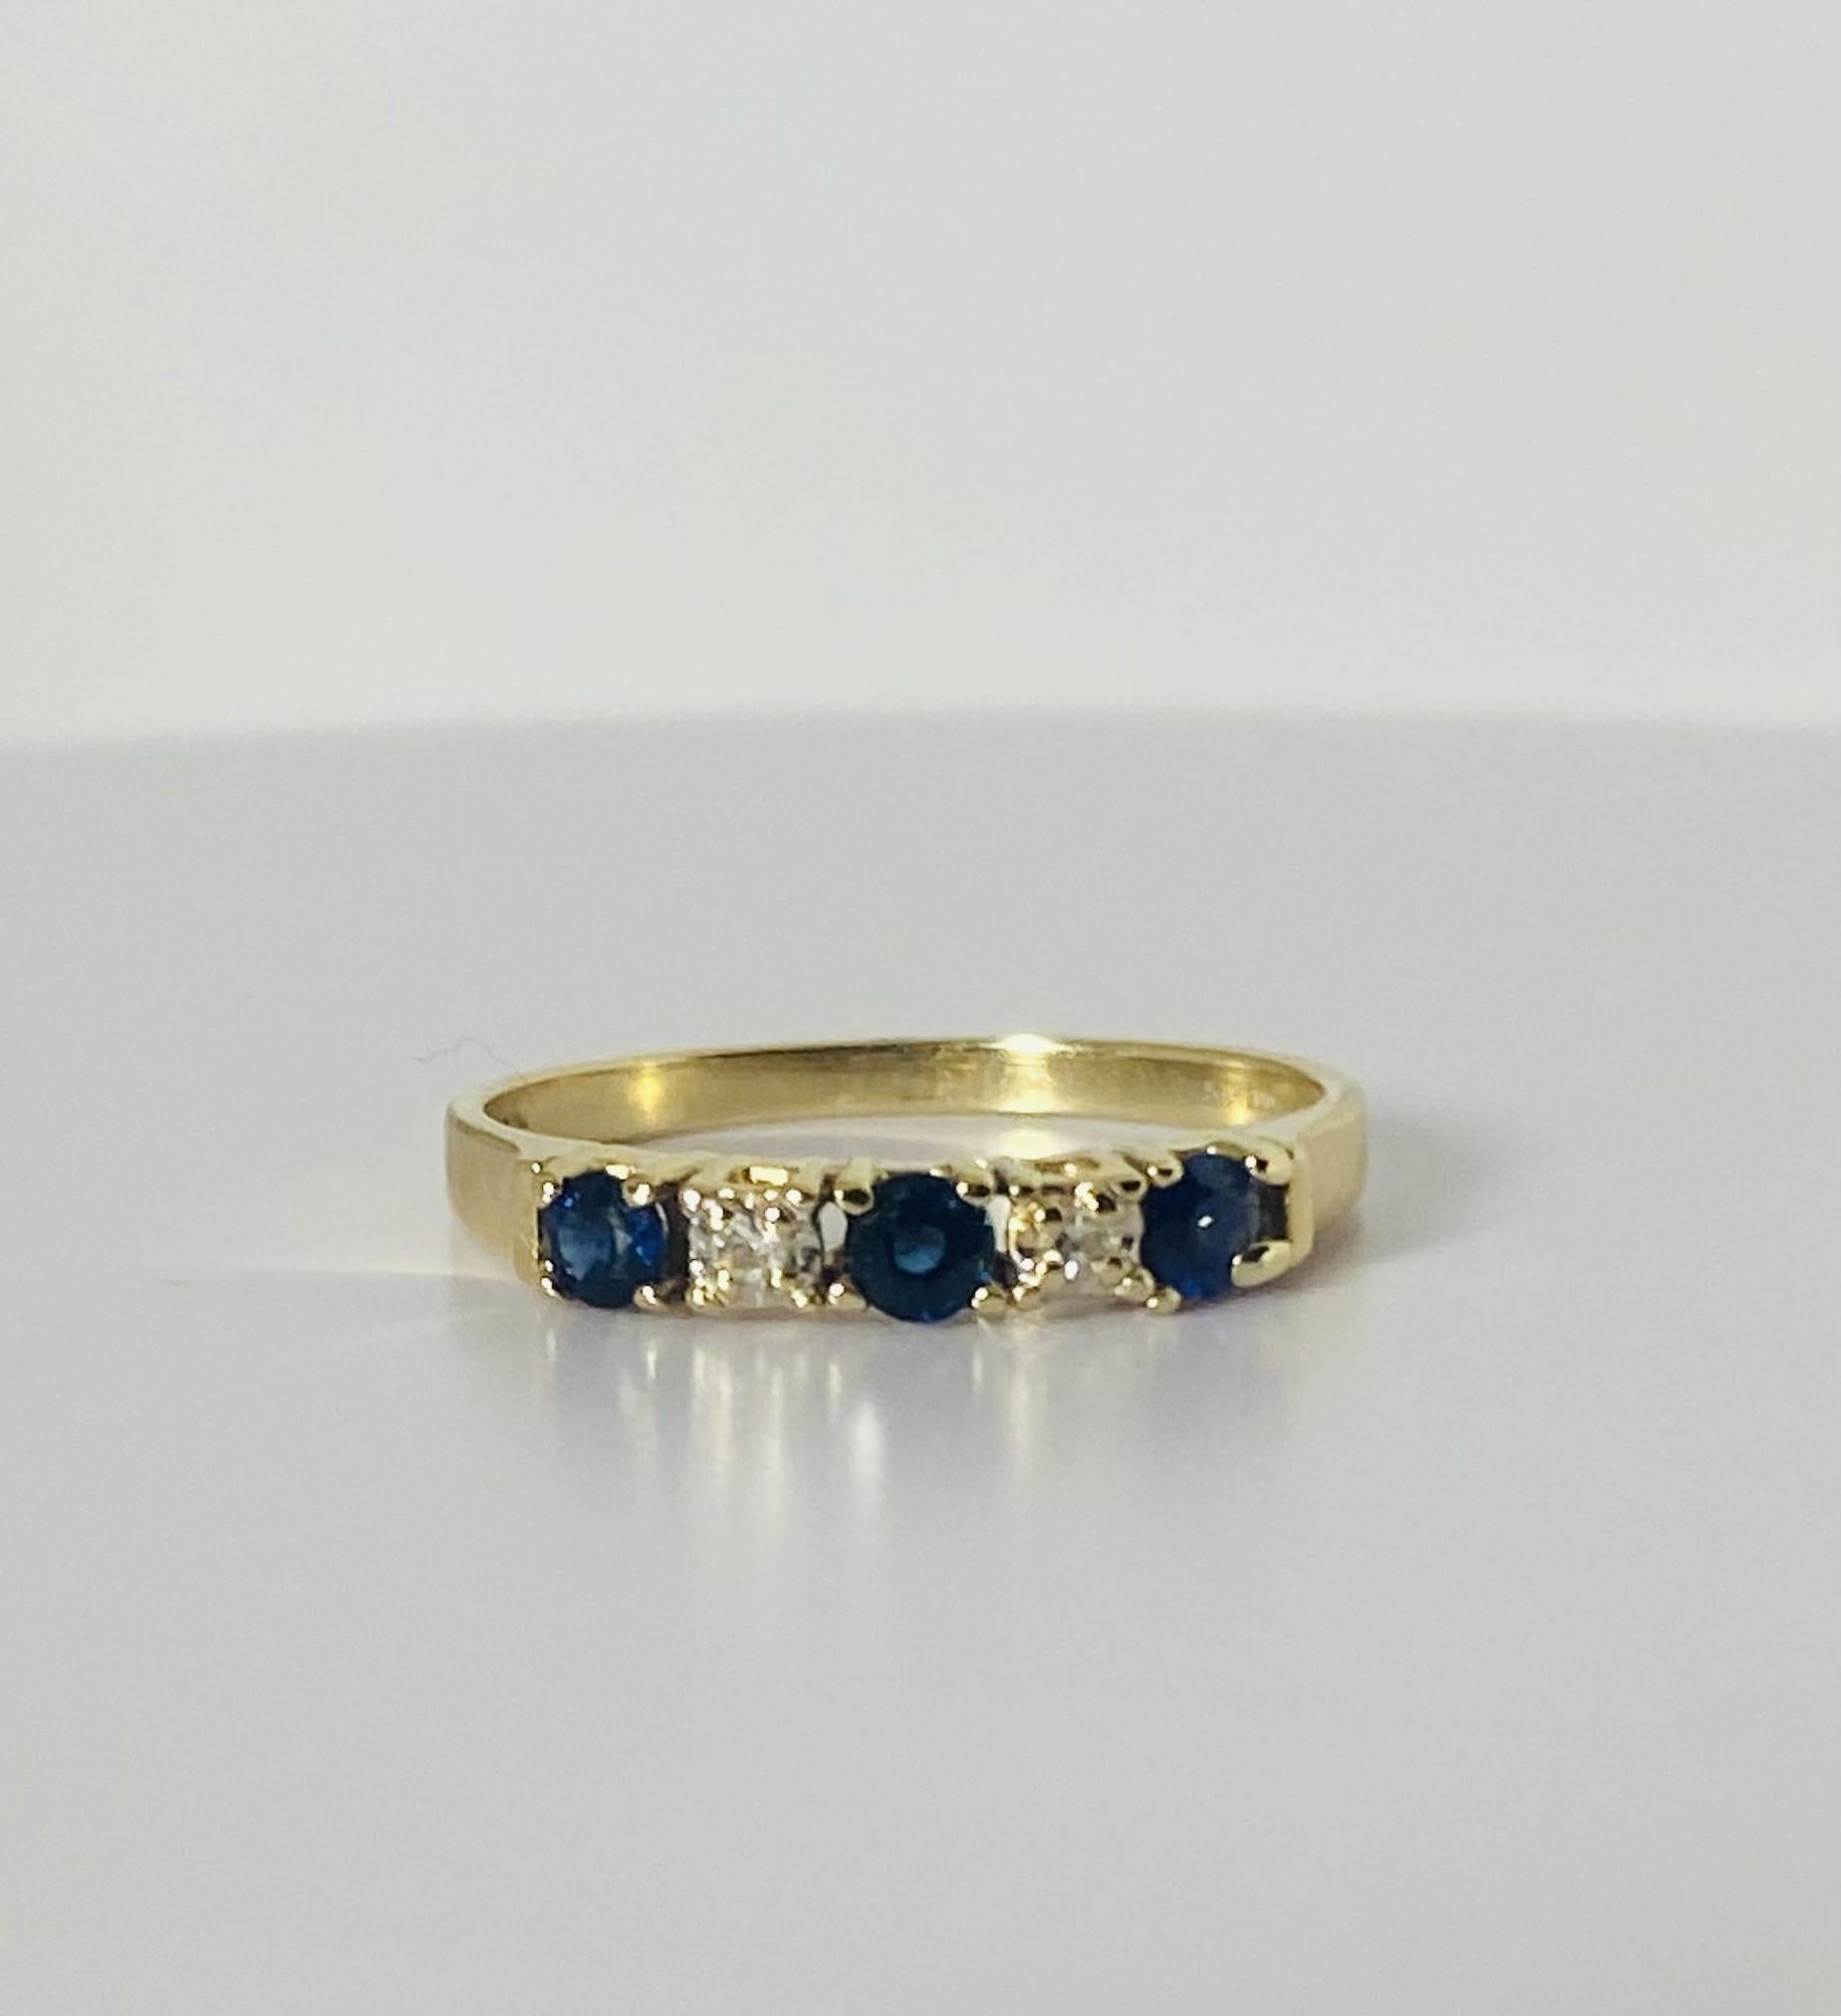 Discover this stunning vintage ring with 2 rose cut diamonds of 0.05 carats each and 2 sapphires of 0.10 carats each in a beautiful sapphire blue color in round cut. The 1950s ring is made of 14 carat yellow gold and the stones are set in a chaton